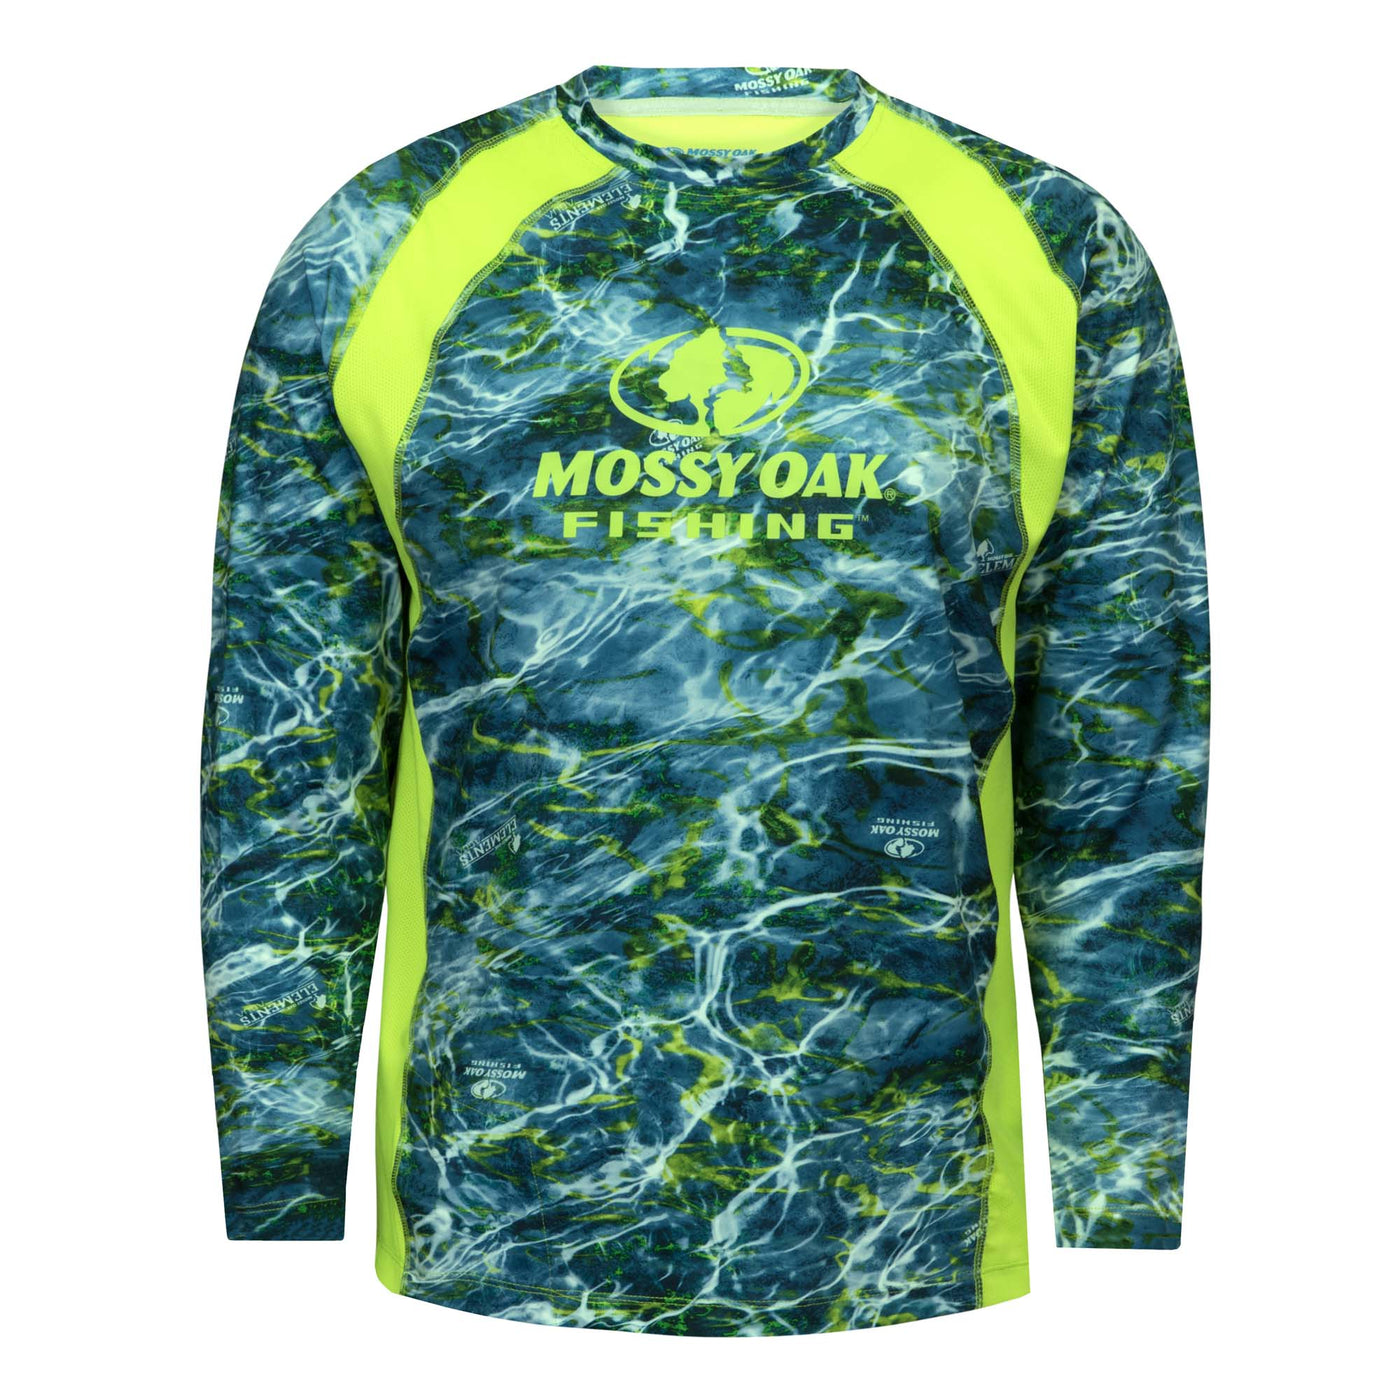 Mossy Oak Fishing Shirts for Men, Long Sleeve, Moisture Wicking, Sun  Protection Cardinal - UV Protection - High Quality - Affordable Prices